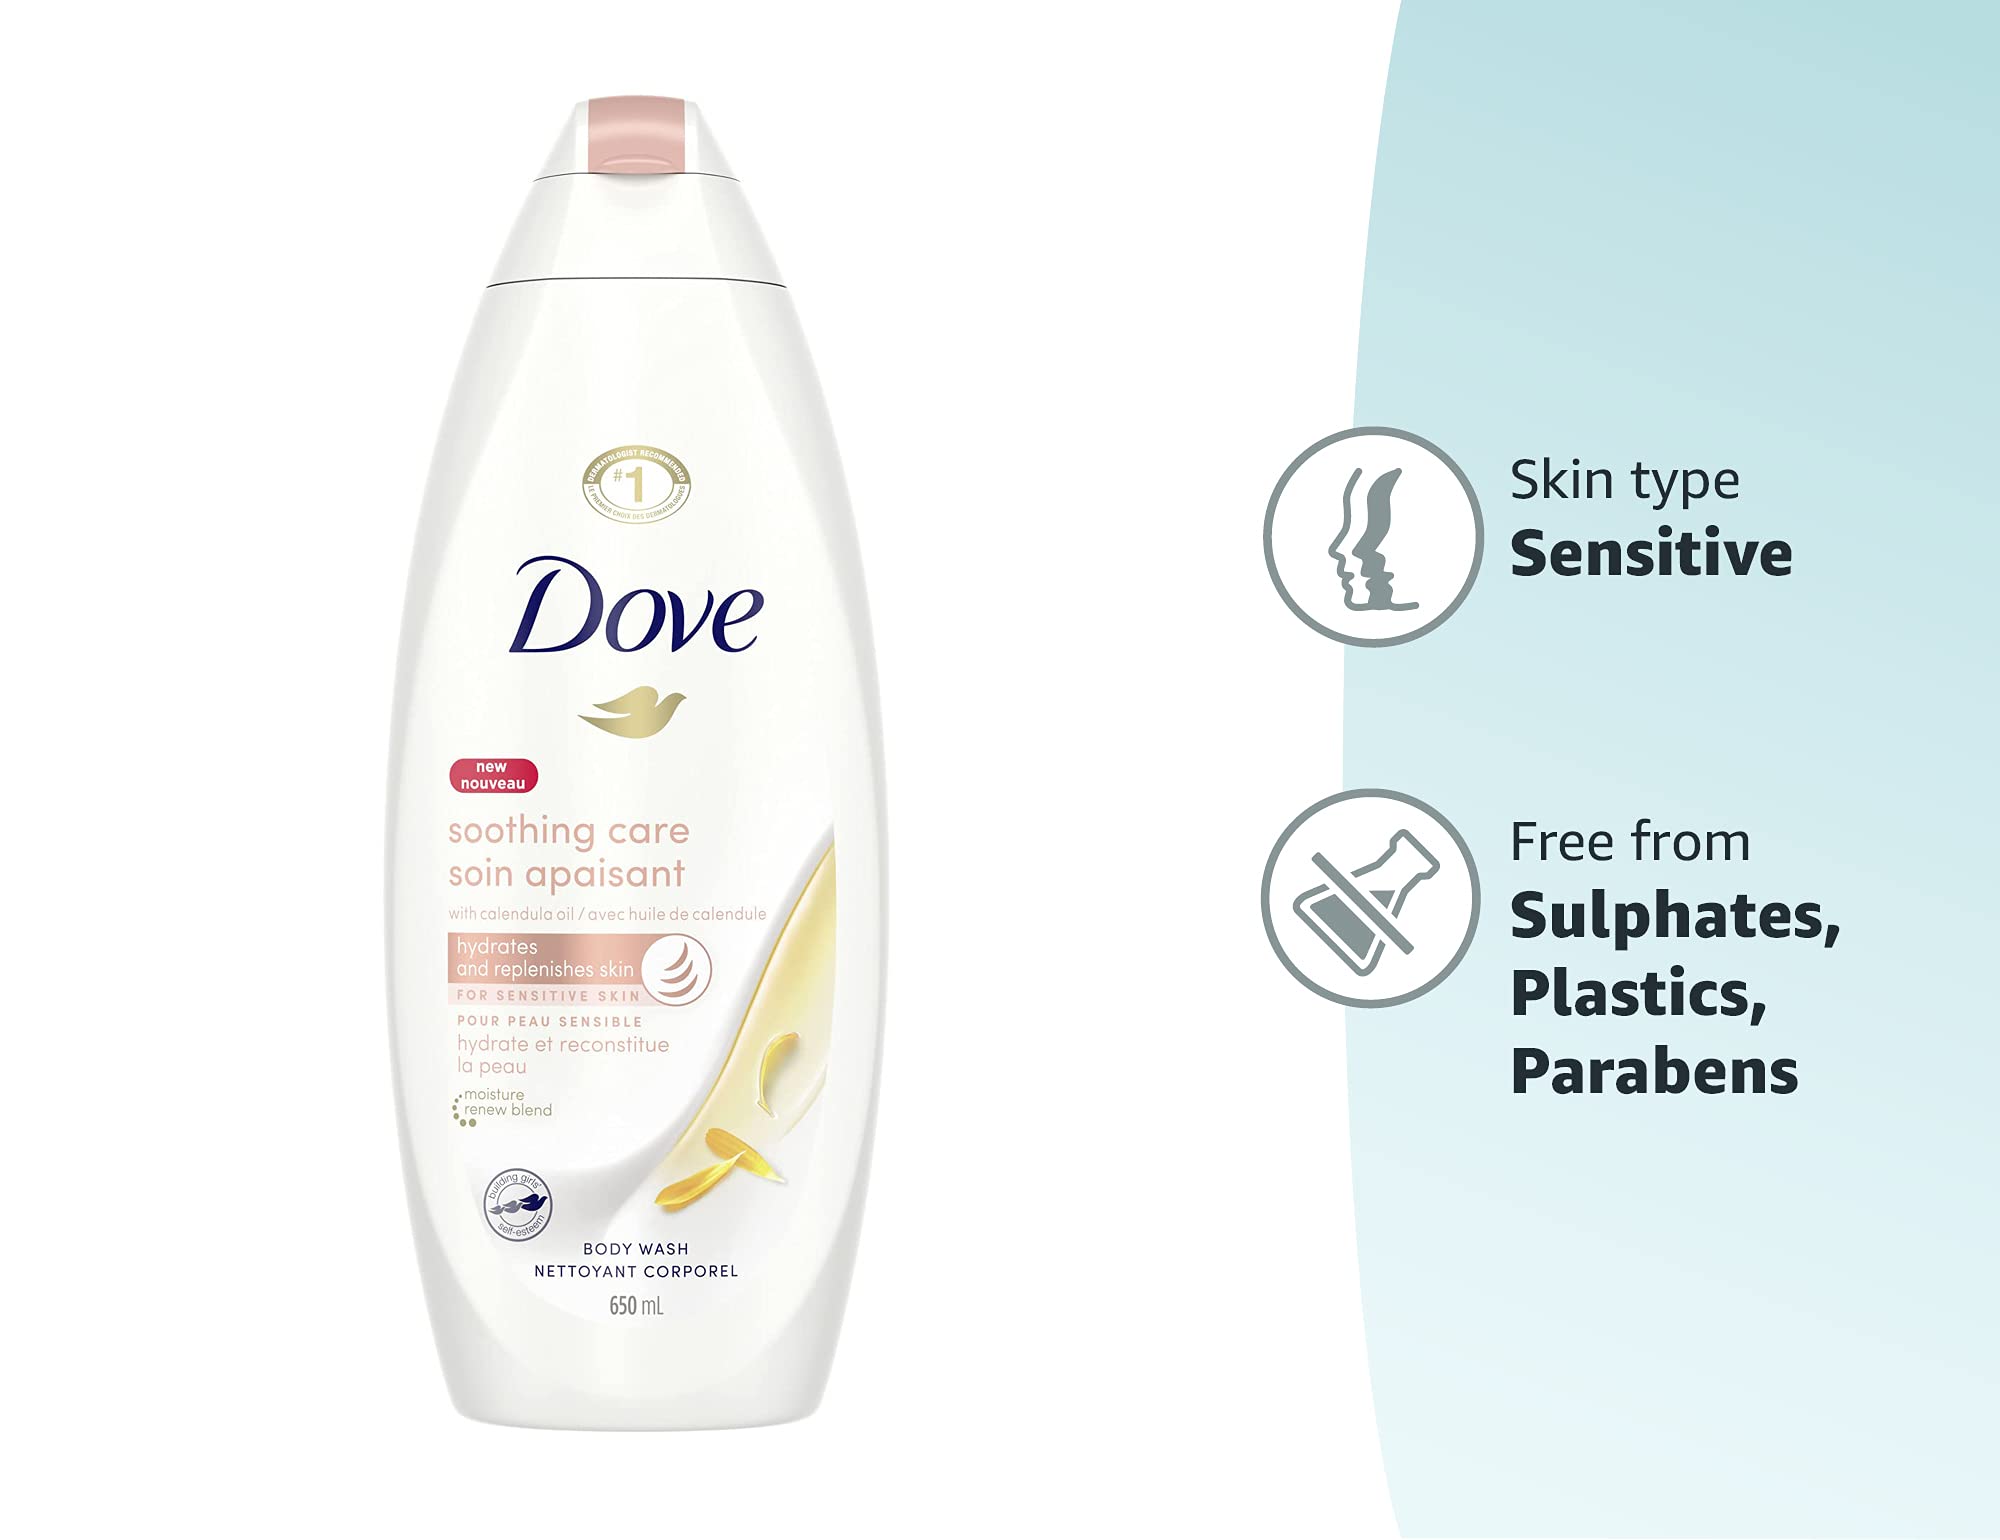 Dove Soothing Care Body Wash for Sensitive Skin with Calendula-Infused Oils Hydrates and Replenishes Skin Sulfate Free, 22 Fl Oz (Pack of 4)